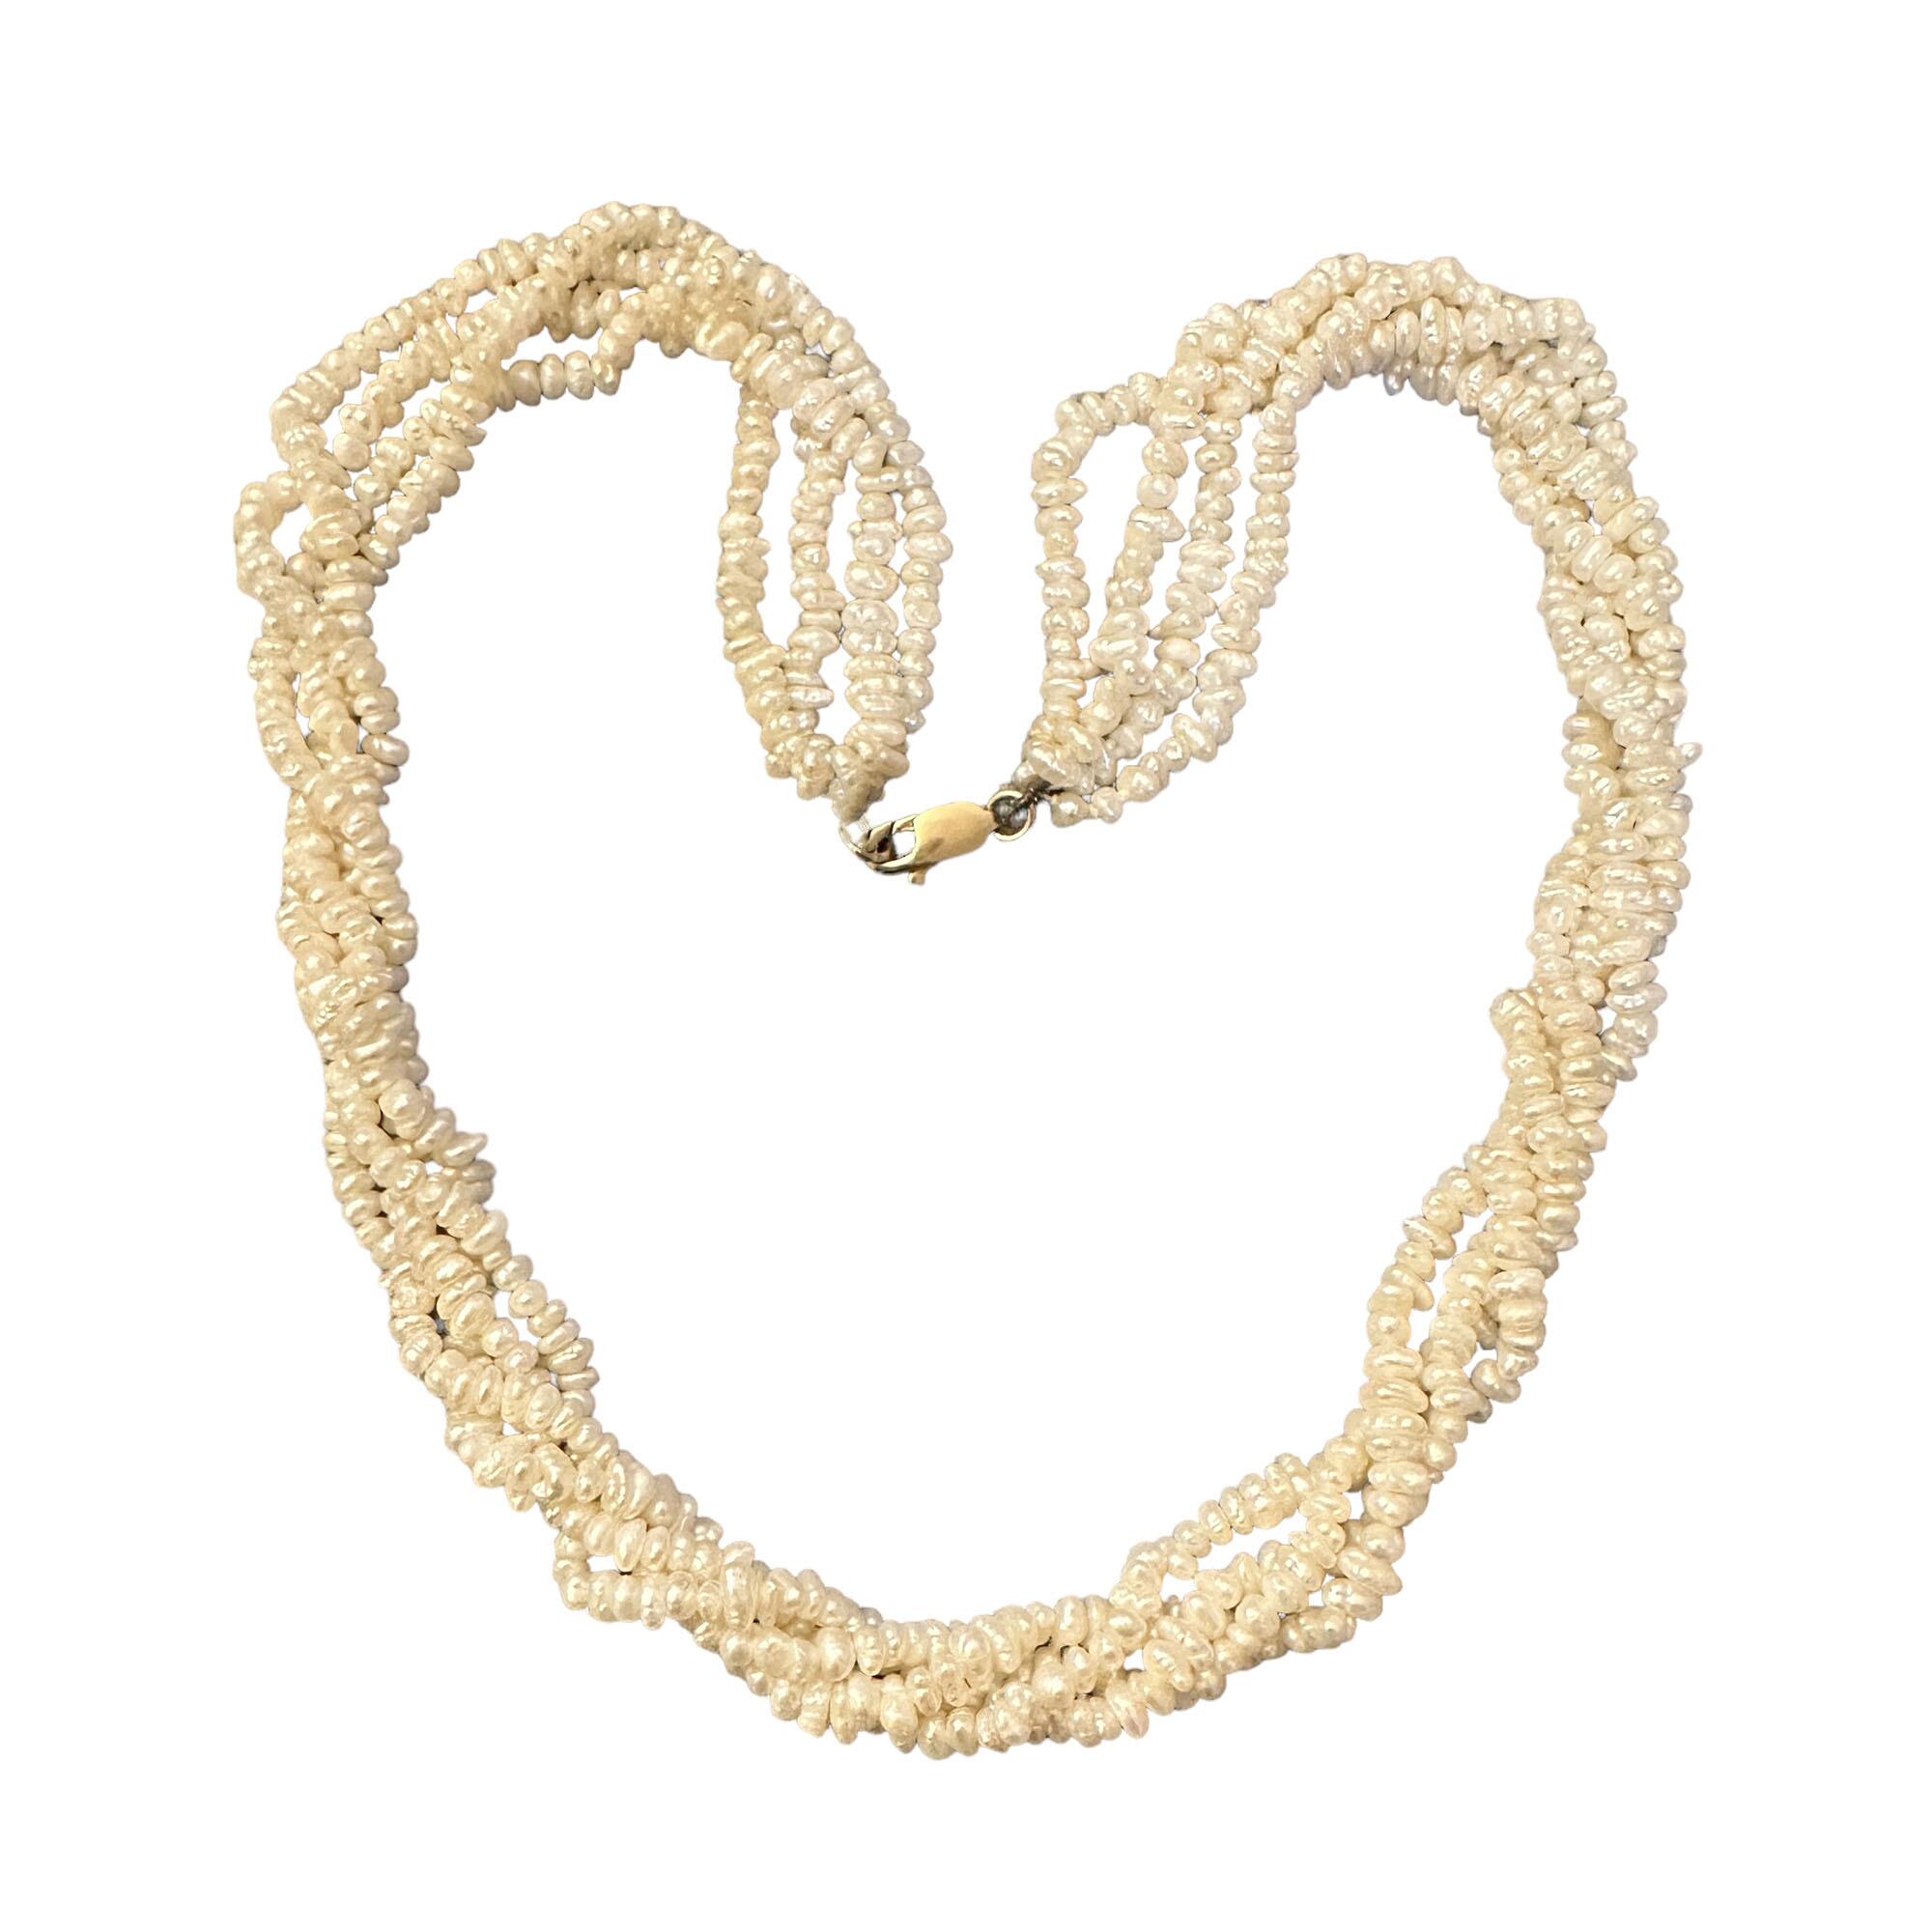 Natural Pearl Necklace | Natural Pearl Jewelry | Woven Rope Necklaces -  Natural Pearl - Aliexpress